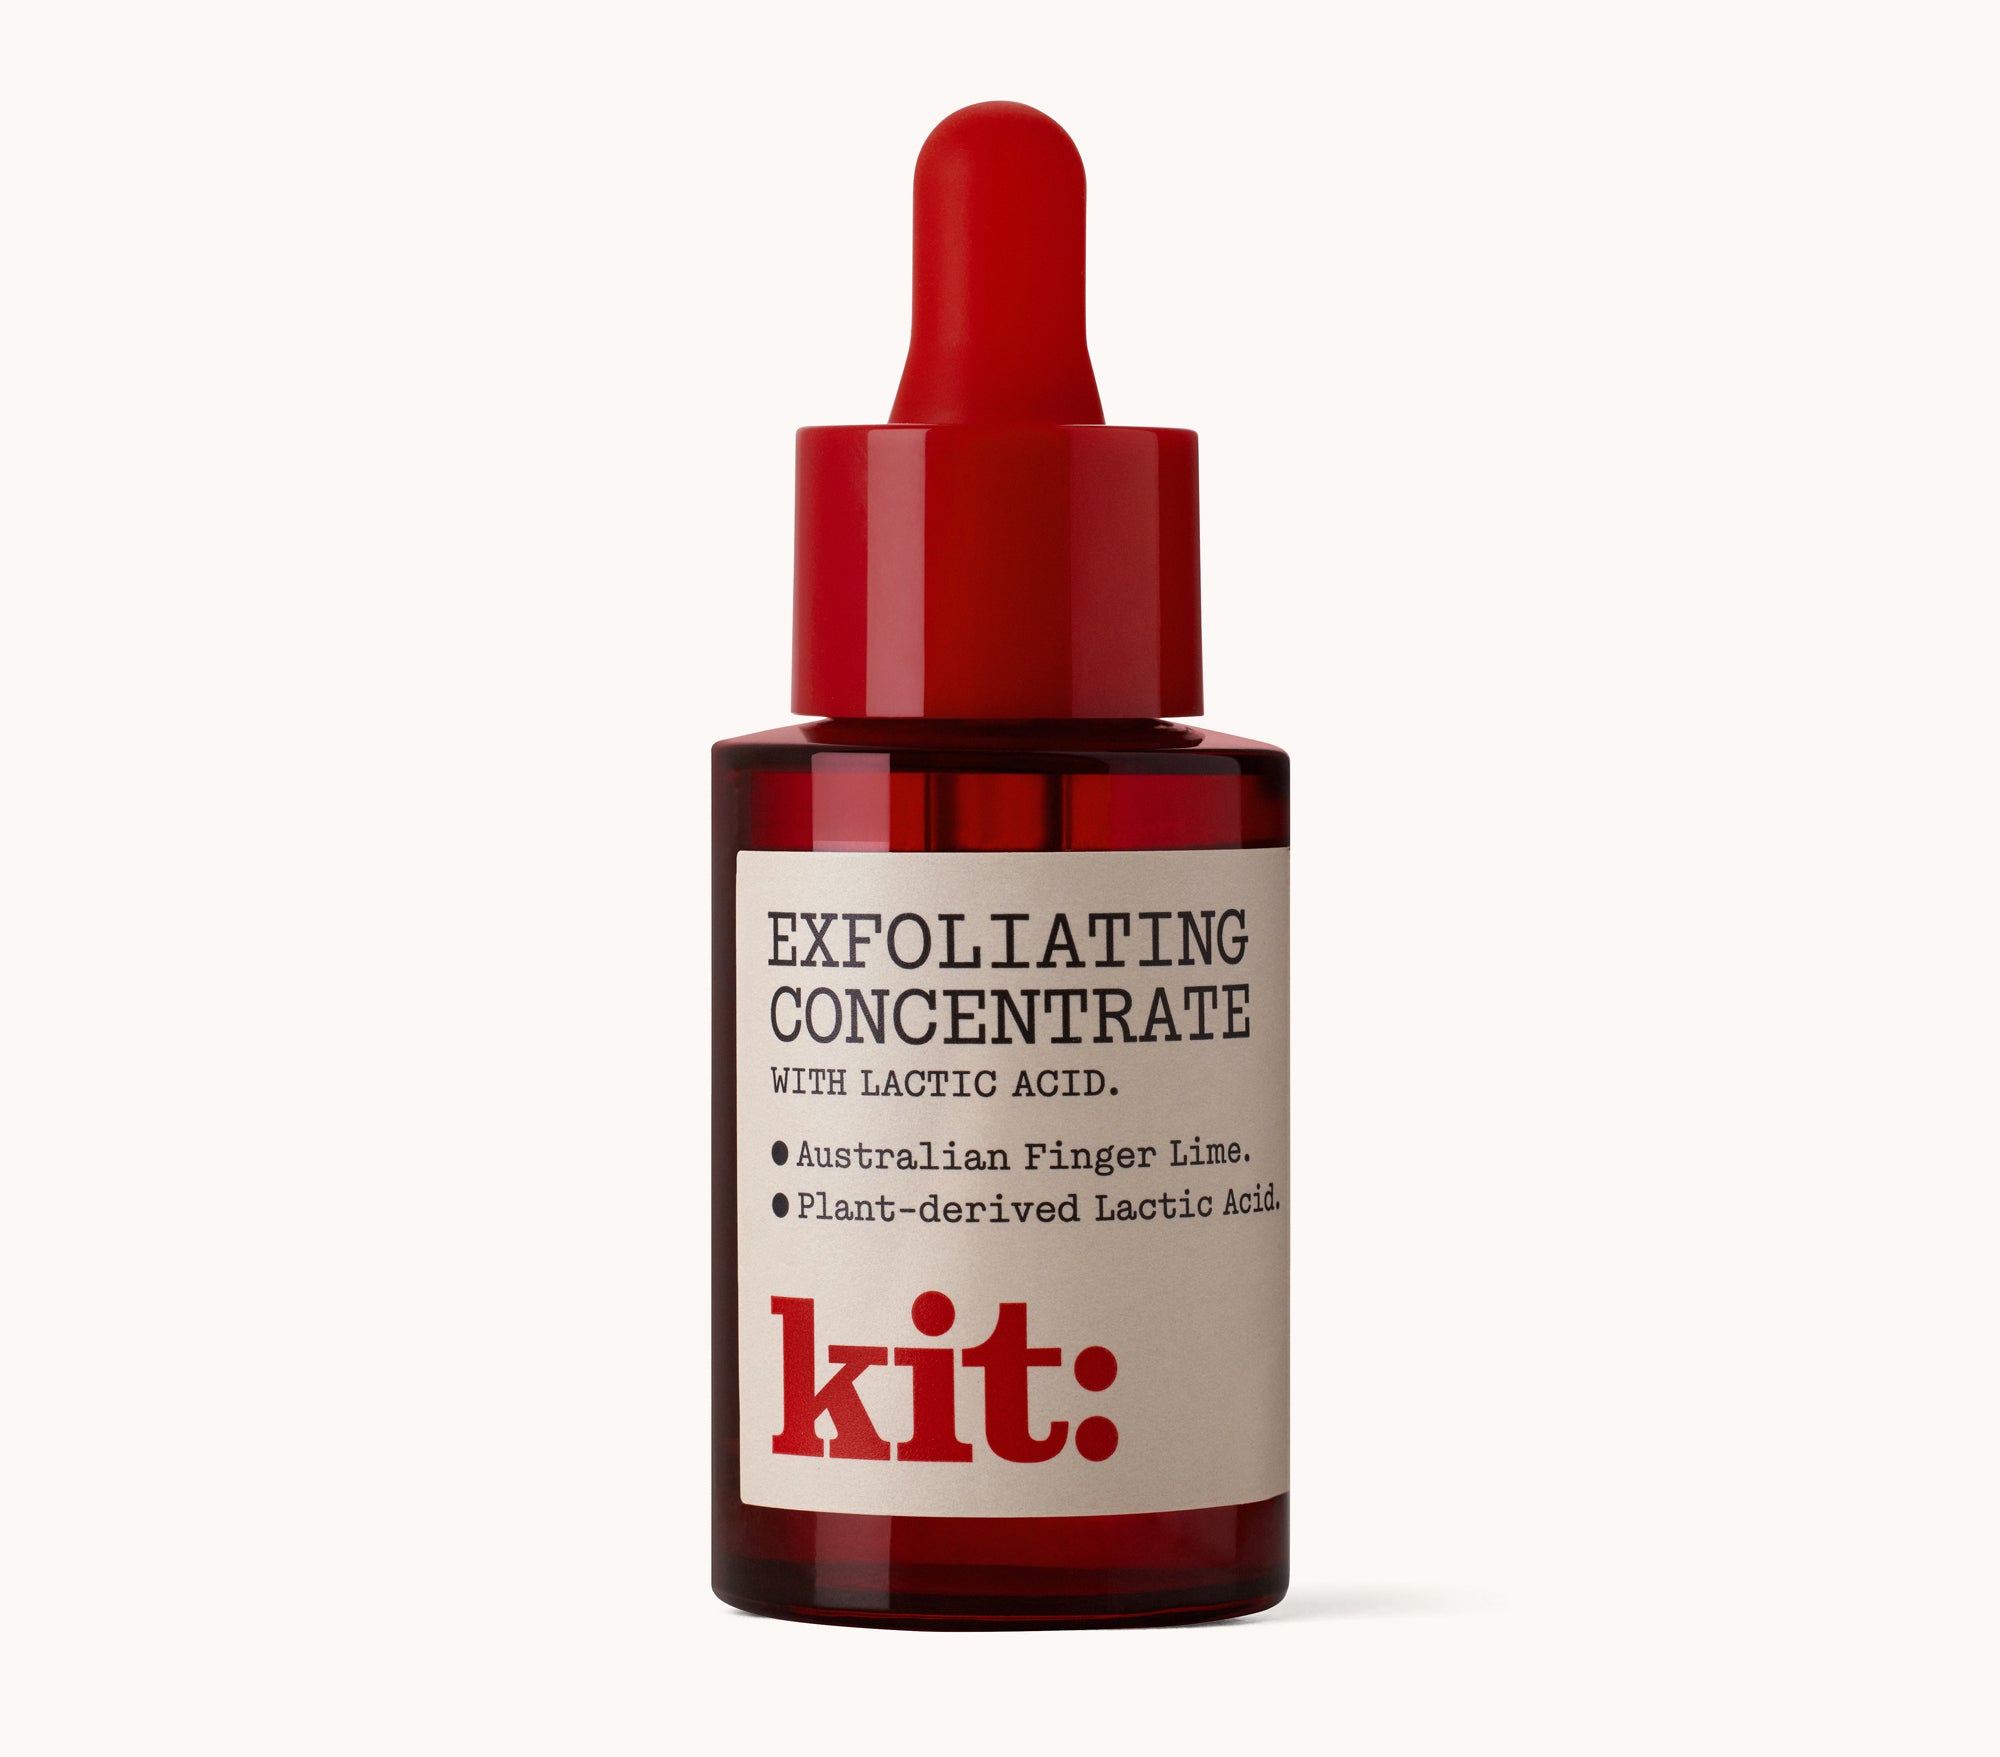 Exfoliating Concentrate